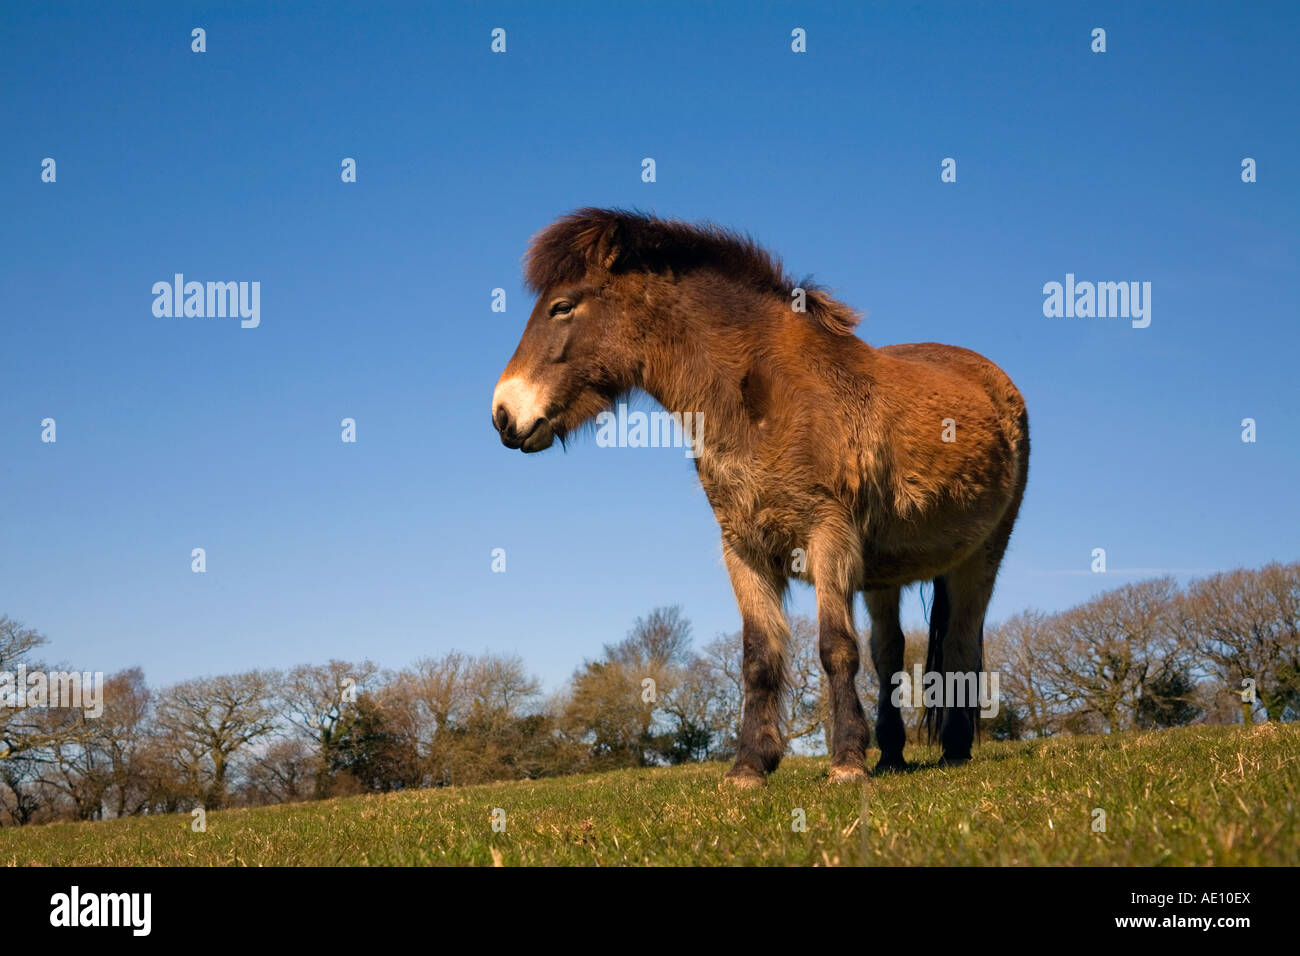 pony at andrew s wood in Devon owned by the devon wildlife trust ponies are used to graze the site Stock Photo